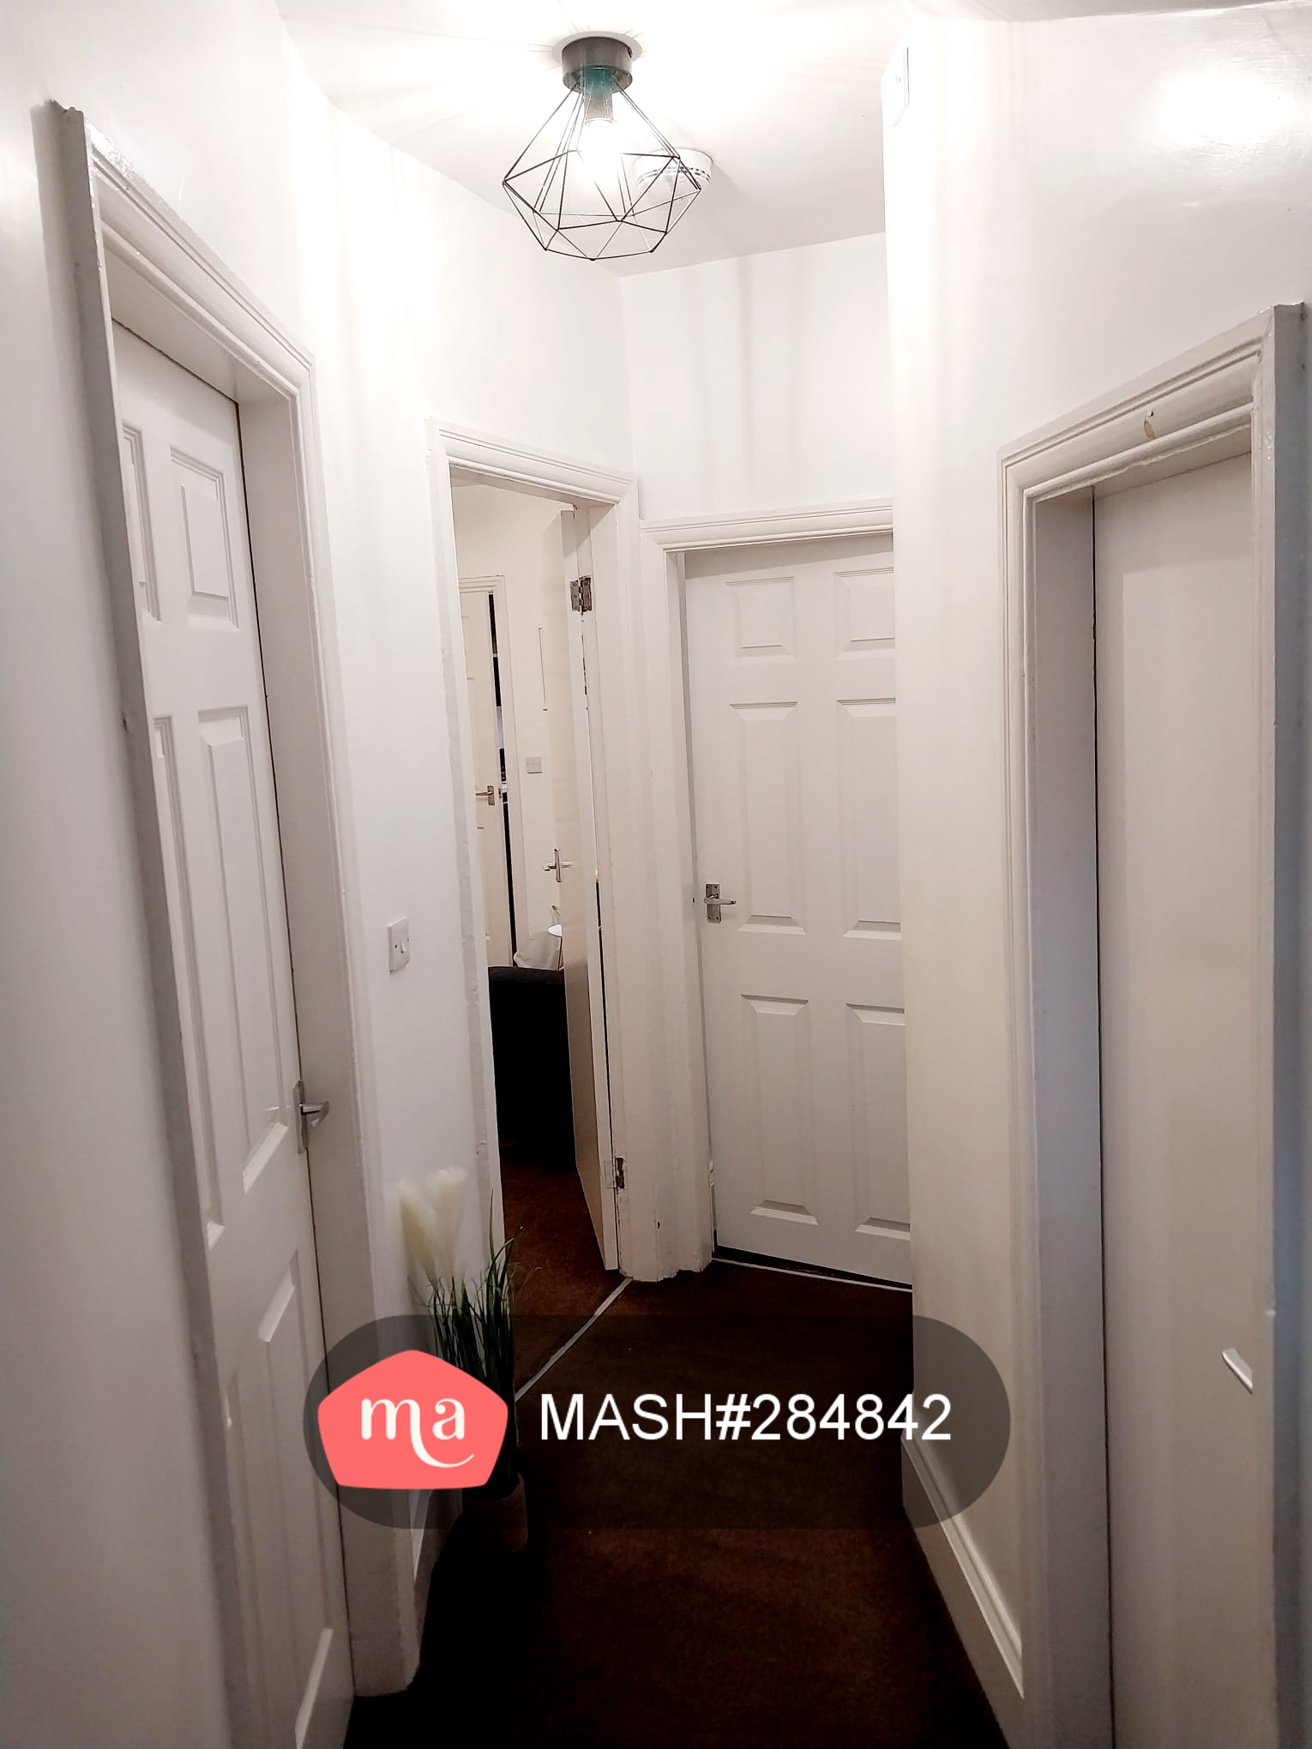 2 Bedroom Semi-detached to rent in Newcastle upon tyne - Mashroom